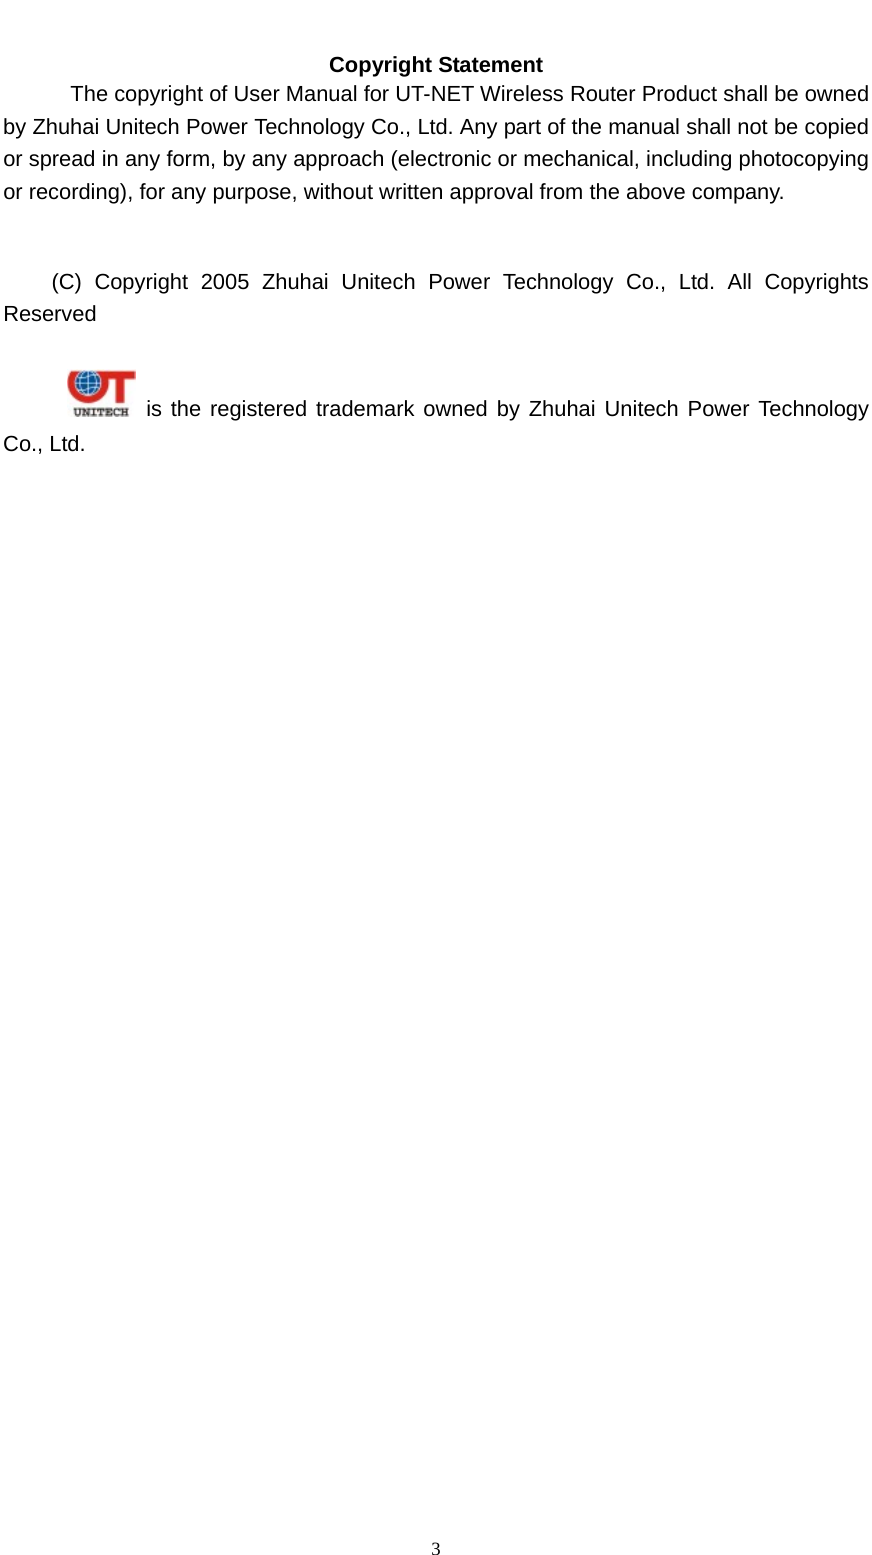   3Copyright Statement The copyright of User Manual for UT-NET Wireless Router Product shall be owned by Zhuhai Unitech Power Technology Co., Ltd. Any part of the manual shall not be copied or spread in any form, by any approach (electronic or mechanical, including photocopying or recording), for any purpose, without written approval from the above company.     (C) Copyright 2005 Zhuhai Unitech Power Technology Co., Ltd. All Copyrights Reserved       is the registered trademark owned by Zhuhai Unitech Power Technology Co., Ltd.    